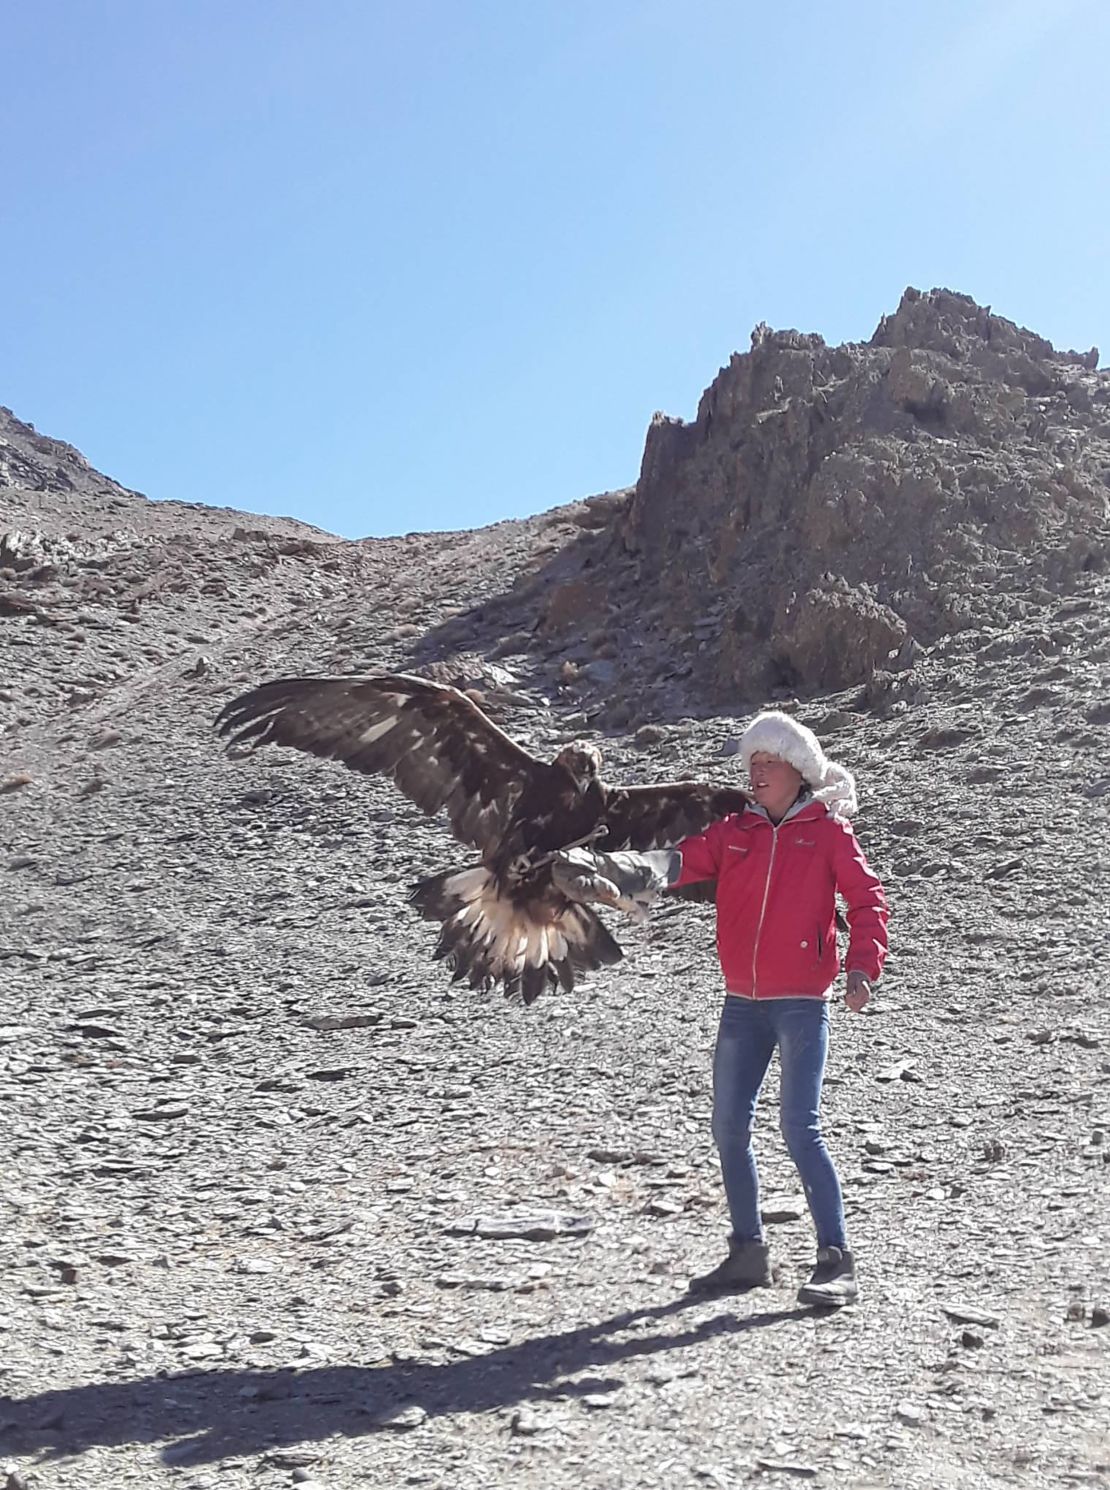 Sattigul, a 16-year-old from Mongolia, was born into a family of nomadic herders who move four times a year. She is pictured with her eagle, Akhyikh, who she writes "always gives me courage and energy."